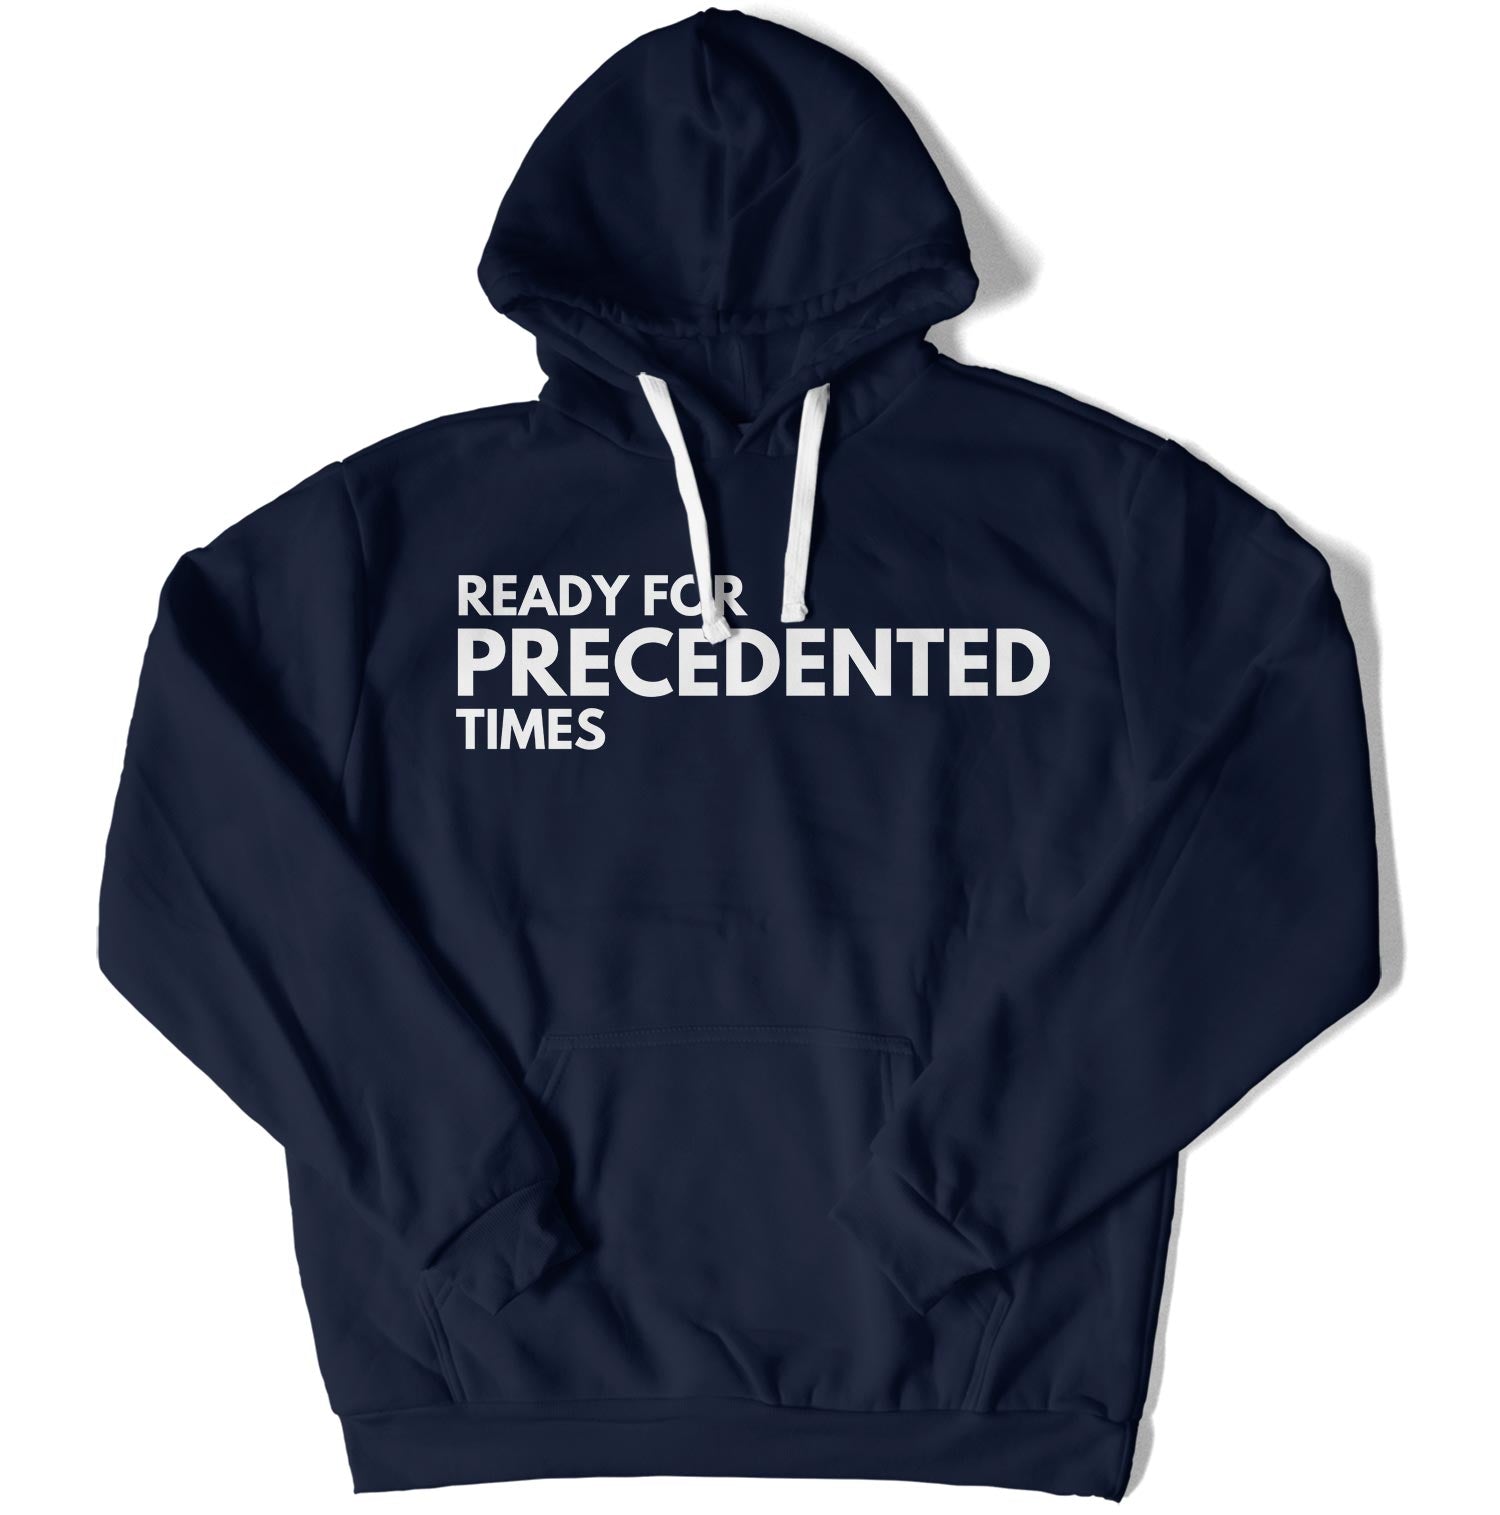 Ready for Precedented Times Unisex Hoodie-East Coast AF Apparel